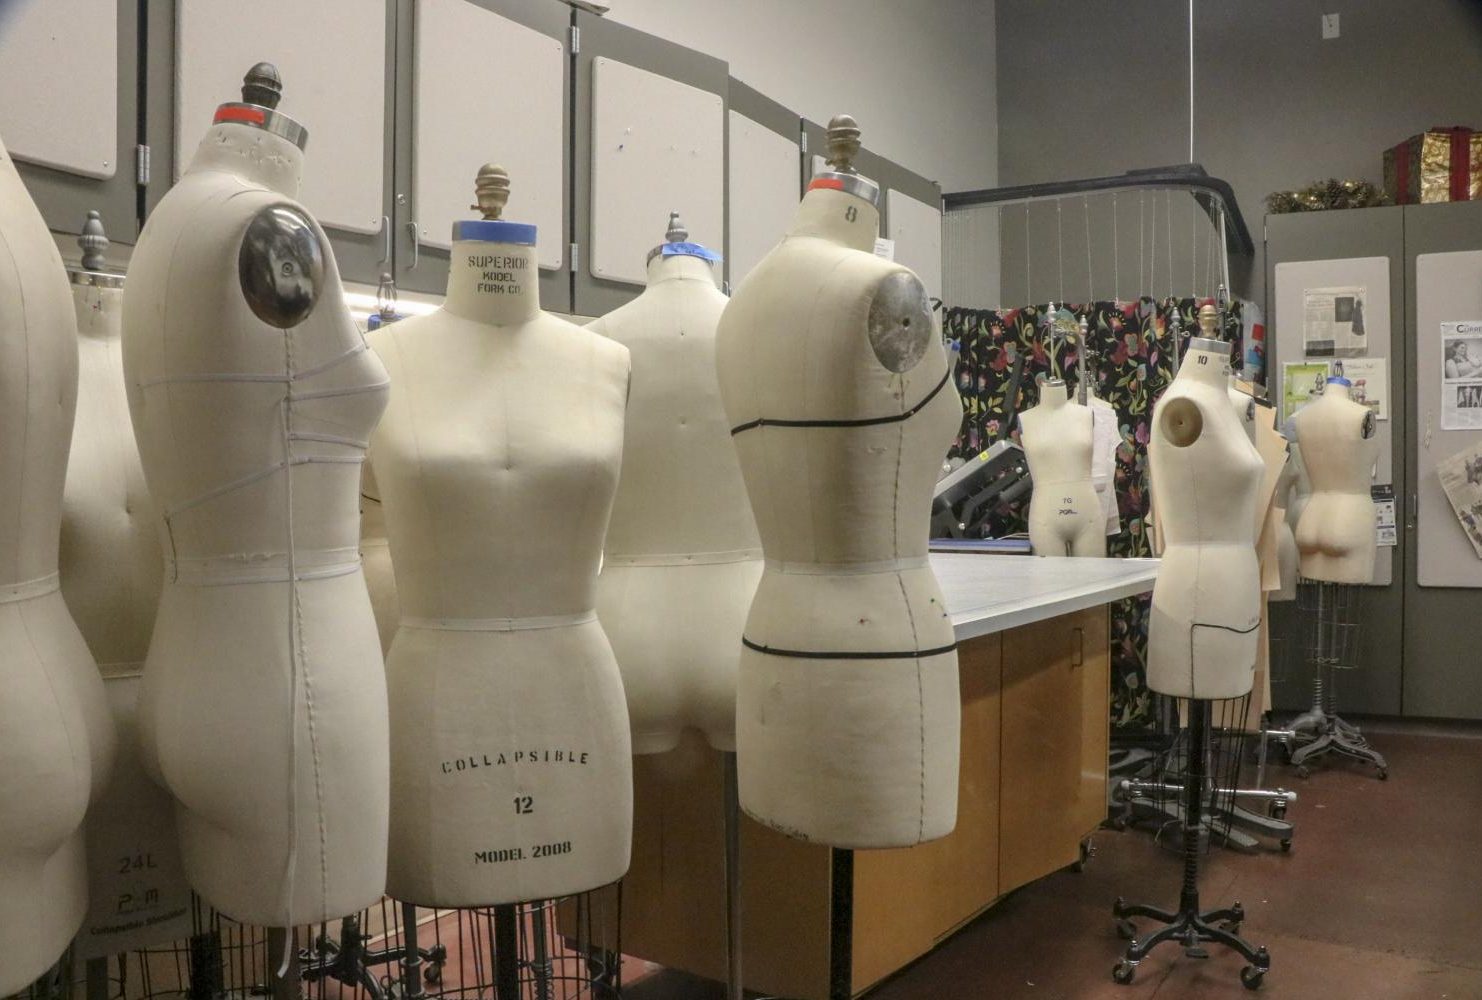 Dress forms are being stored in Arts and Science Room 105, where the Fashion Promotions class works to organize the fashion show, and where the model call will be held on Friday, Feb. 22, 2019. (Photo by Irene Jacobs)